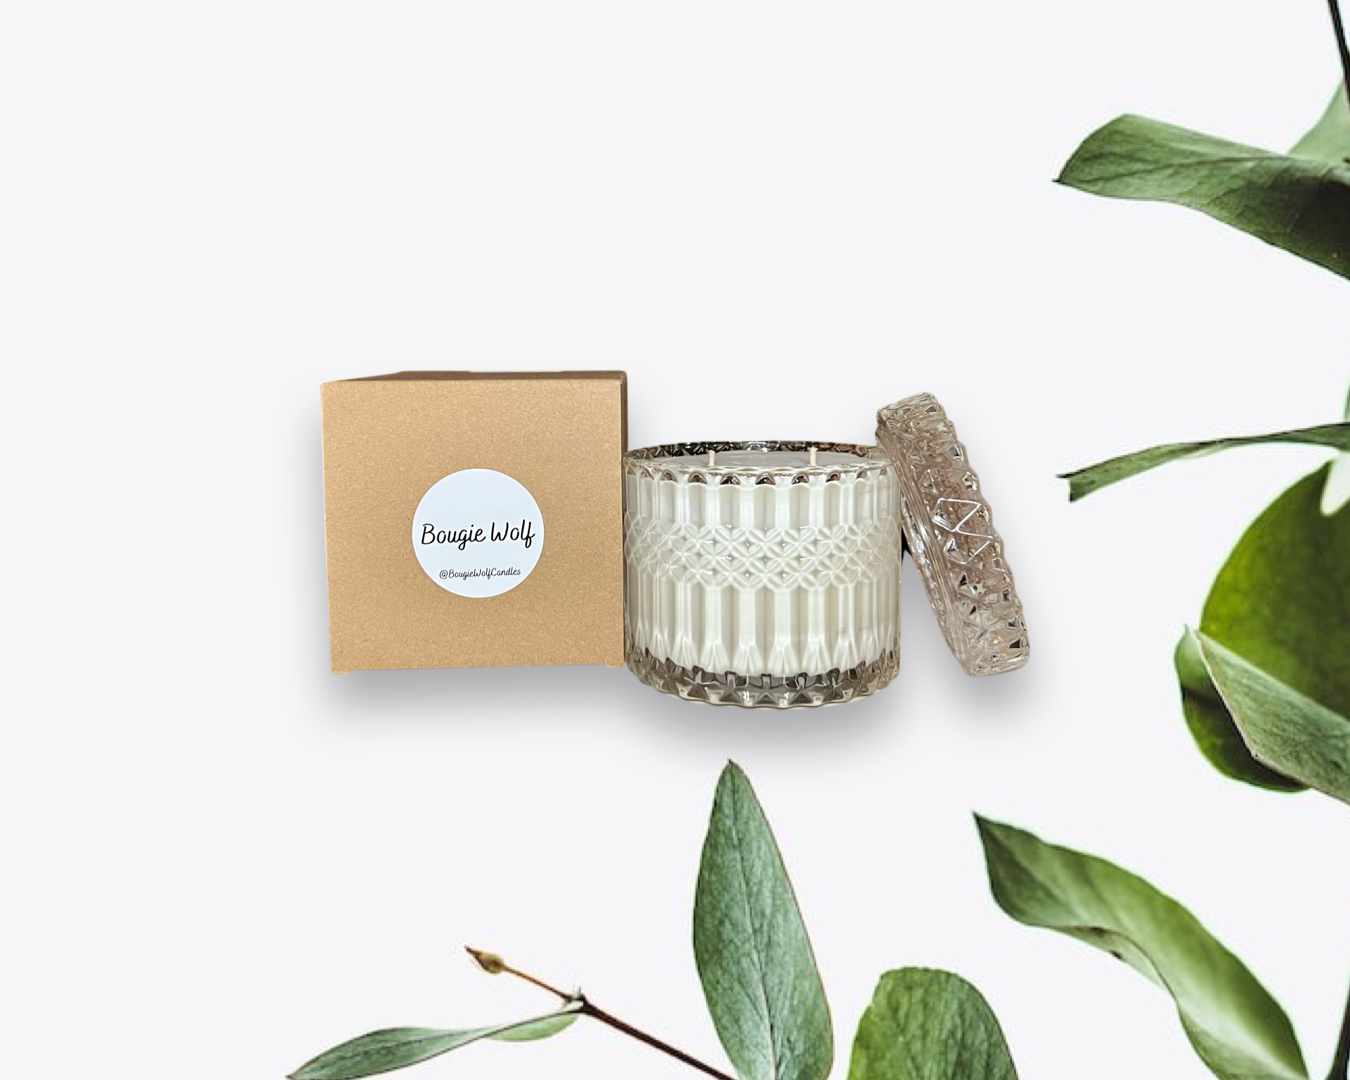 Premium Australian brand melbourne, deluxe soy candle Bougie Wolf Candles, light throw, cotton, crystal cut, long lasting, best scent throw, citrus, lemongrass, sweet, Citrus, Jasmine, Rose, Yang-Ylang, mandala soy wax crystal cut glass jar light throw clear 